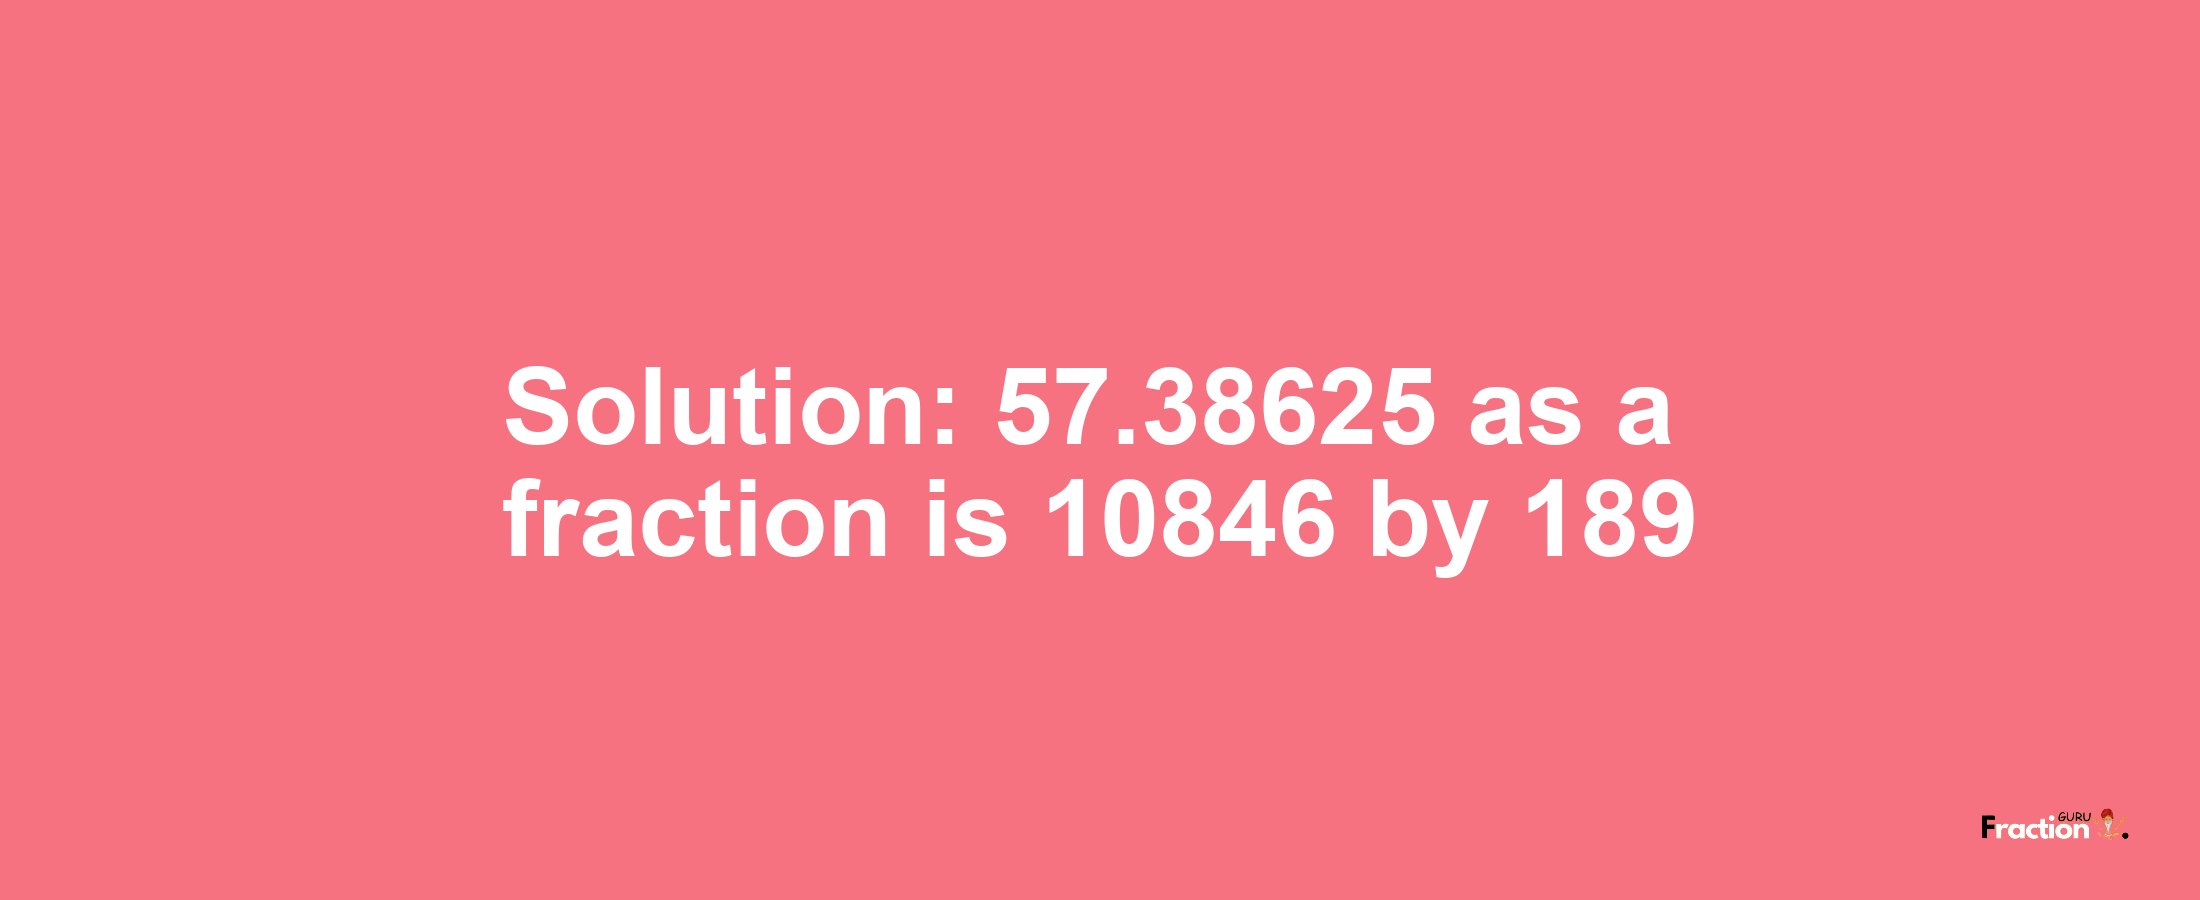 Solution:57.38625 as a fraction is 10846/189